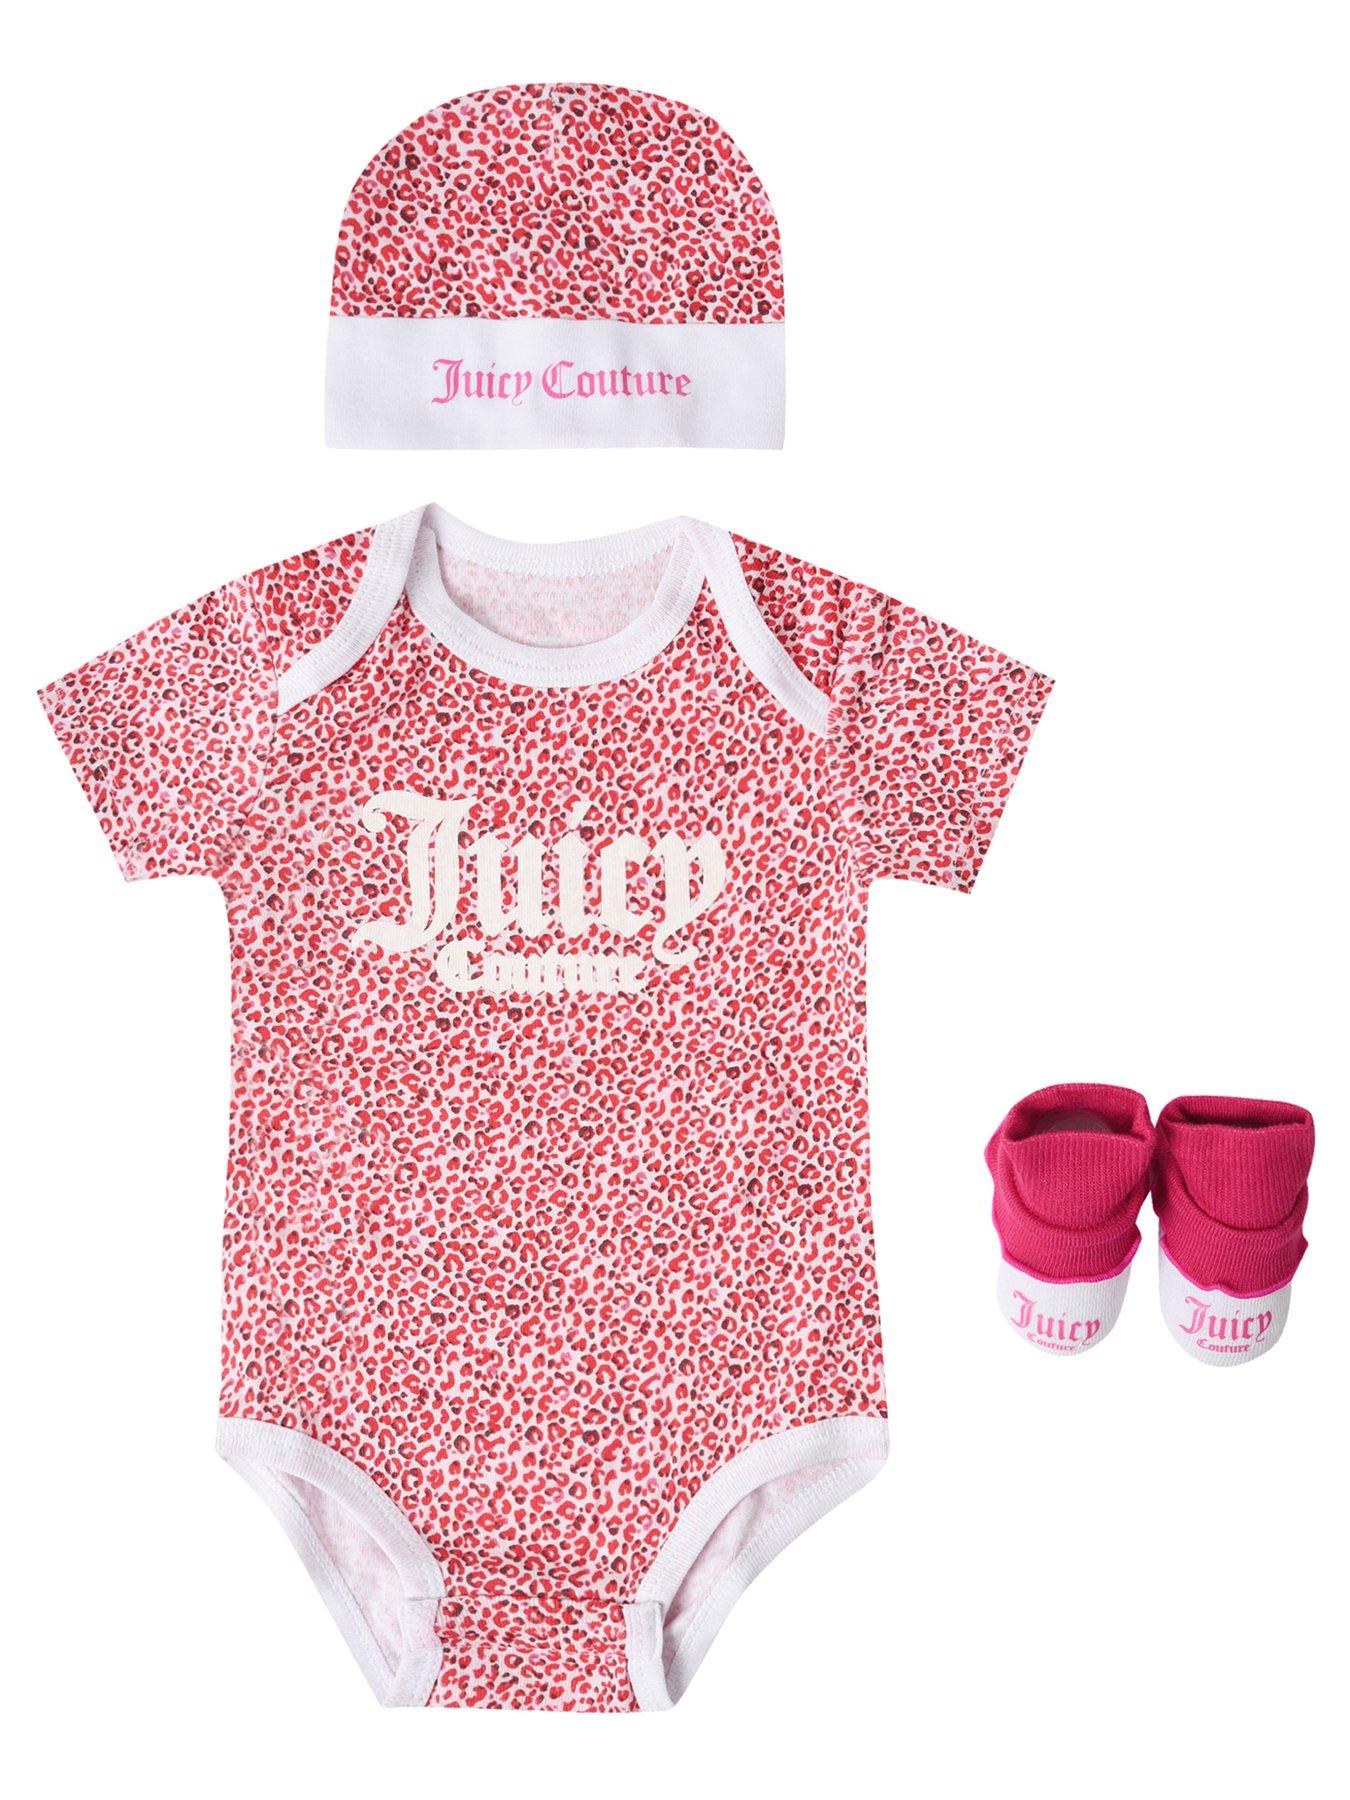 juicy couture baby tracksuit